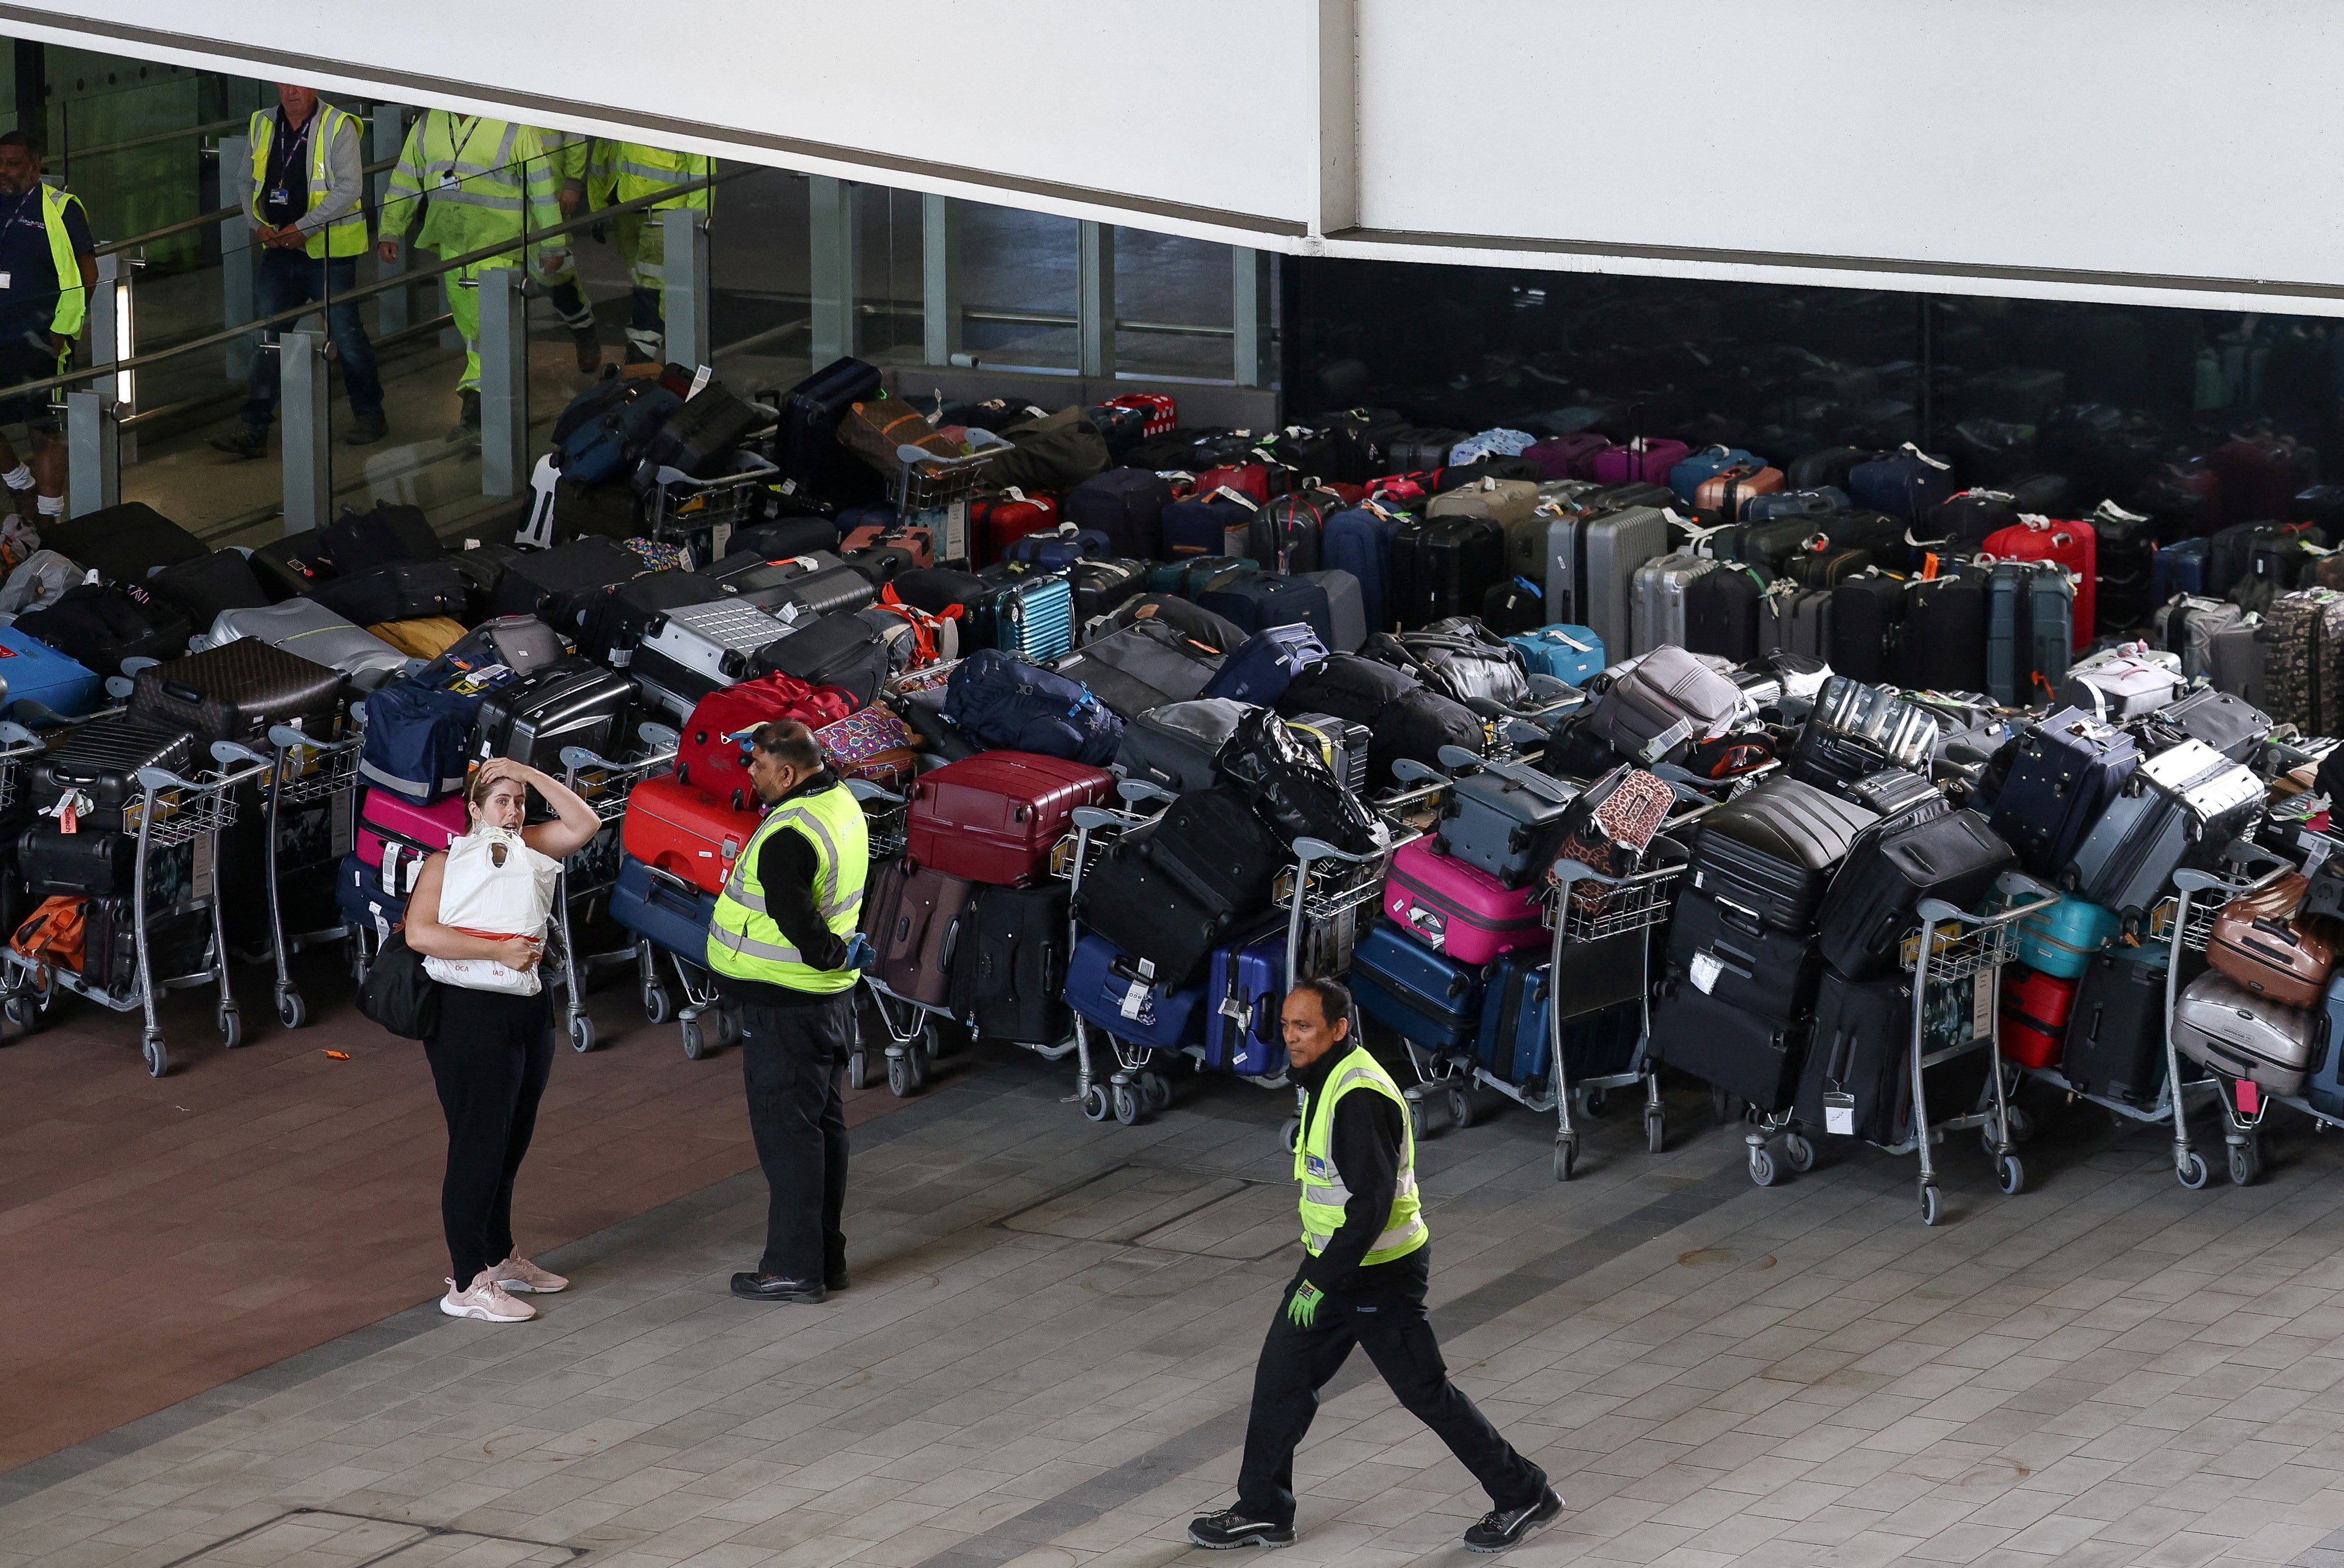 Airport workers stand next to lines of luggage arranged outside Terminal 2 at Heathrow in June